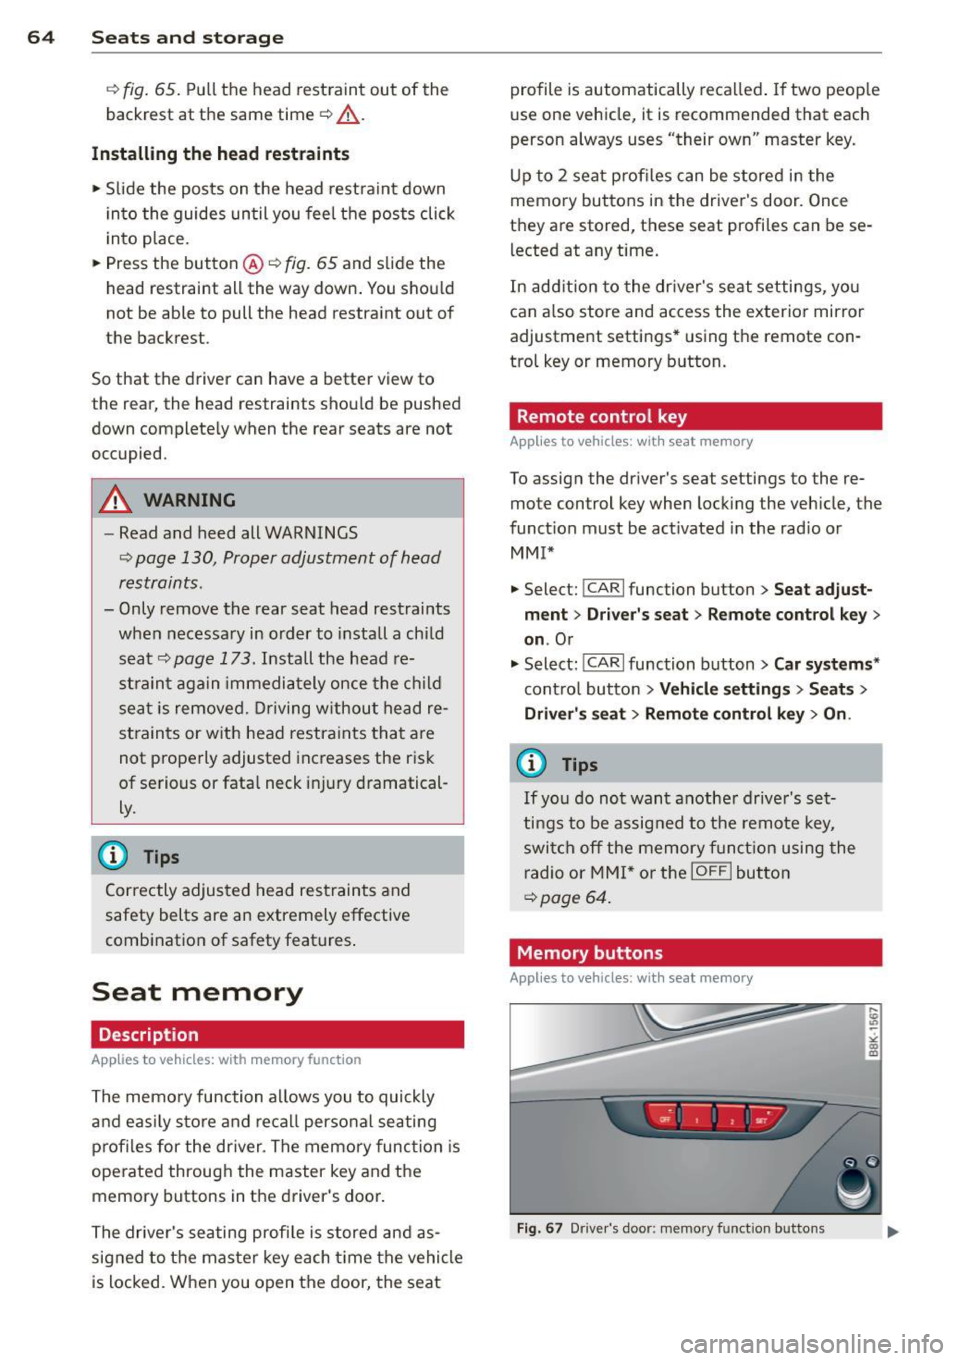 AUDI A4 2015  Owners Manual 64  Seats  and  storage 
¢ fig.  65. Pull the  head  restraint out  of  the 
backrest  at  the  same  time¢,&. . 
Installing  the  head restraints 
.. Slide  the  posts  on  the  head  restraint dow